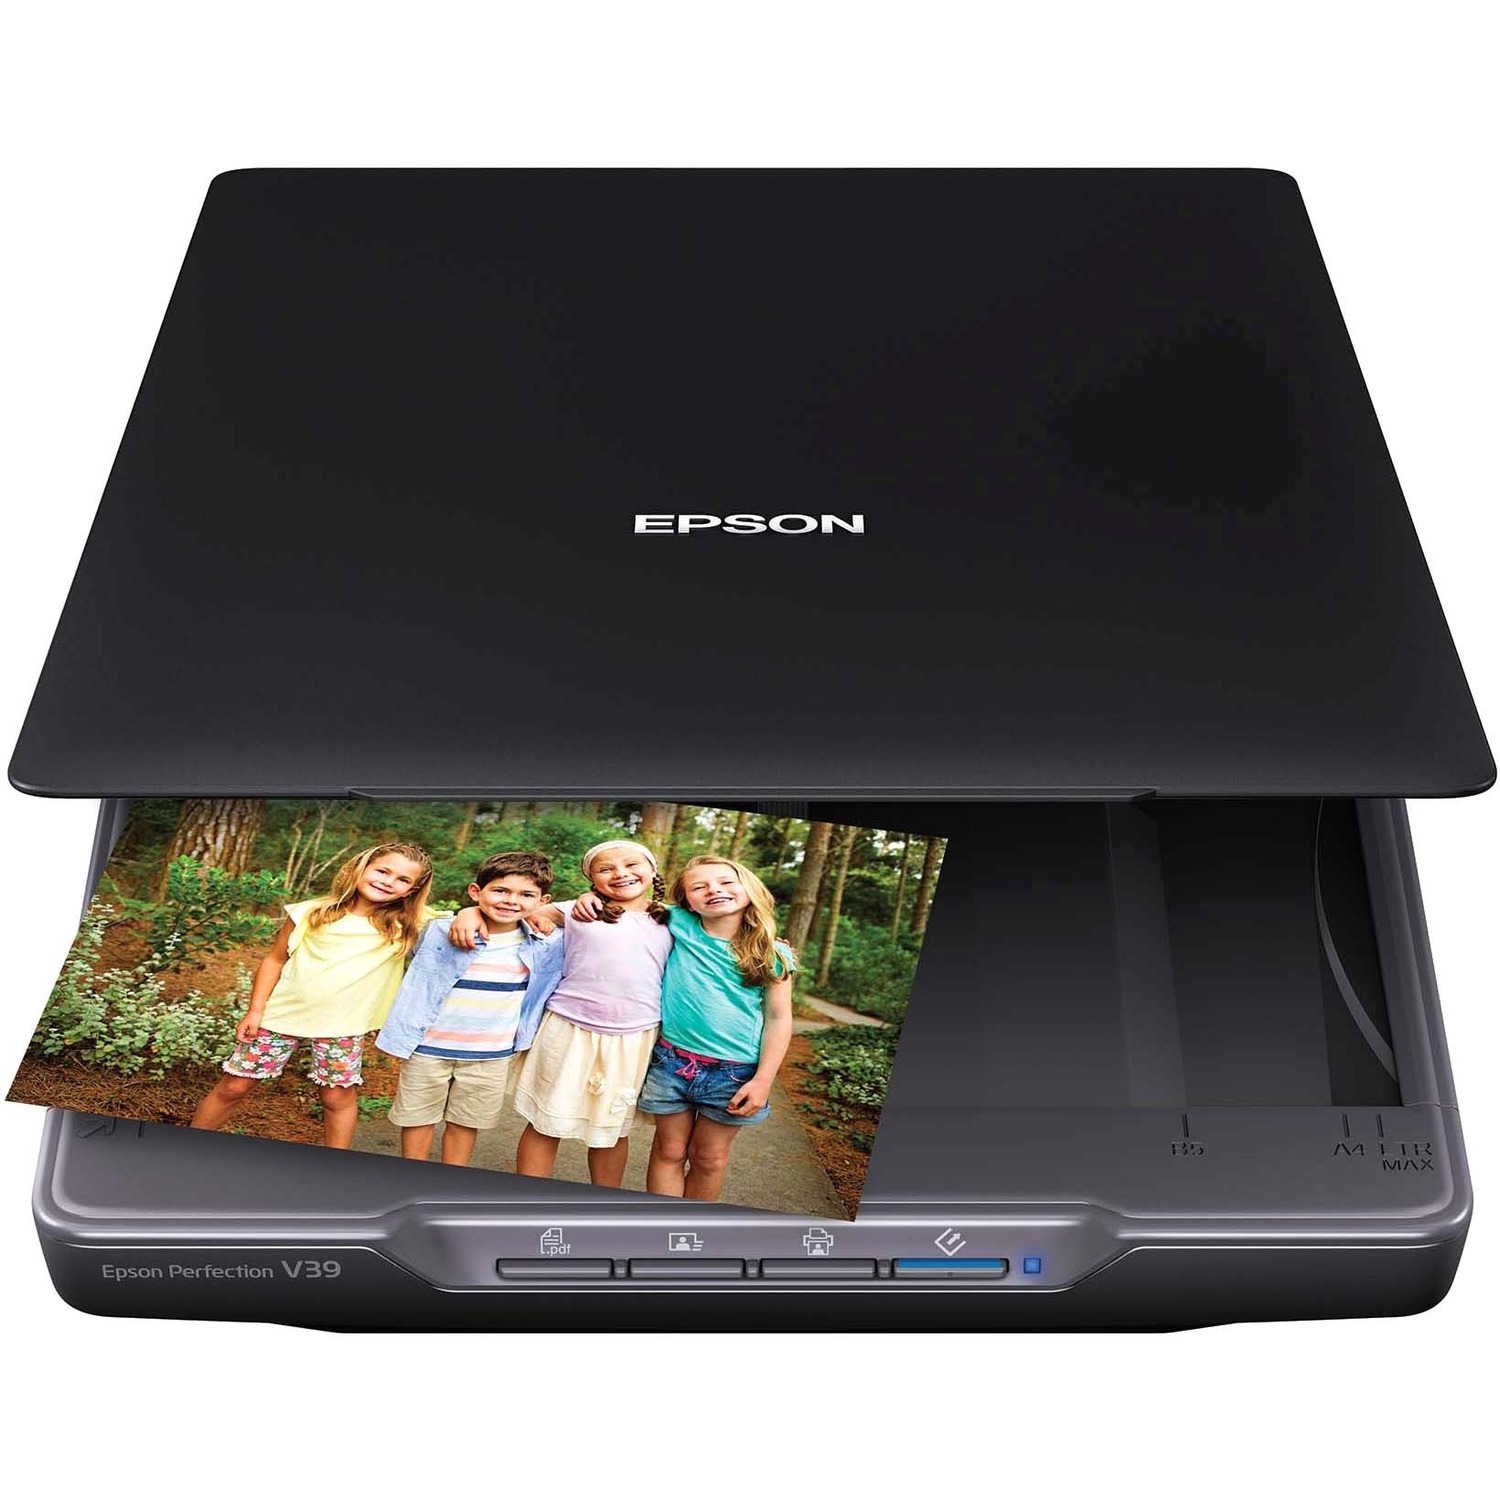 Epson Perfection V39 Color Photo and Document Scanner, 4800 x 4800 dpi, Black - image 1 of 7